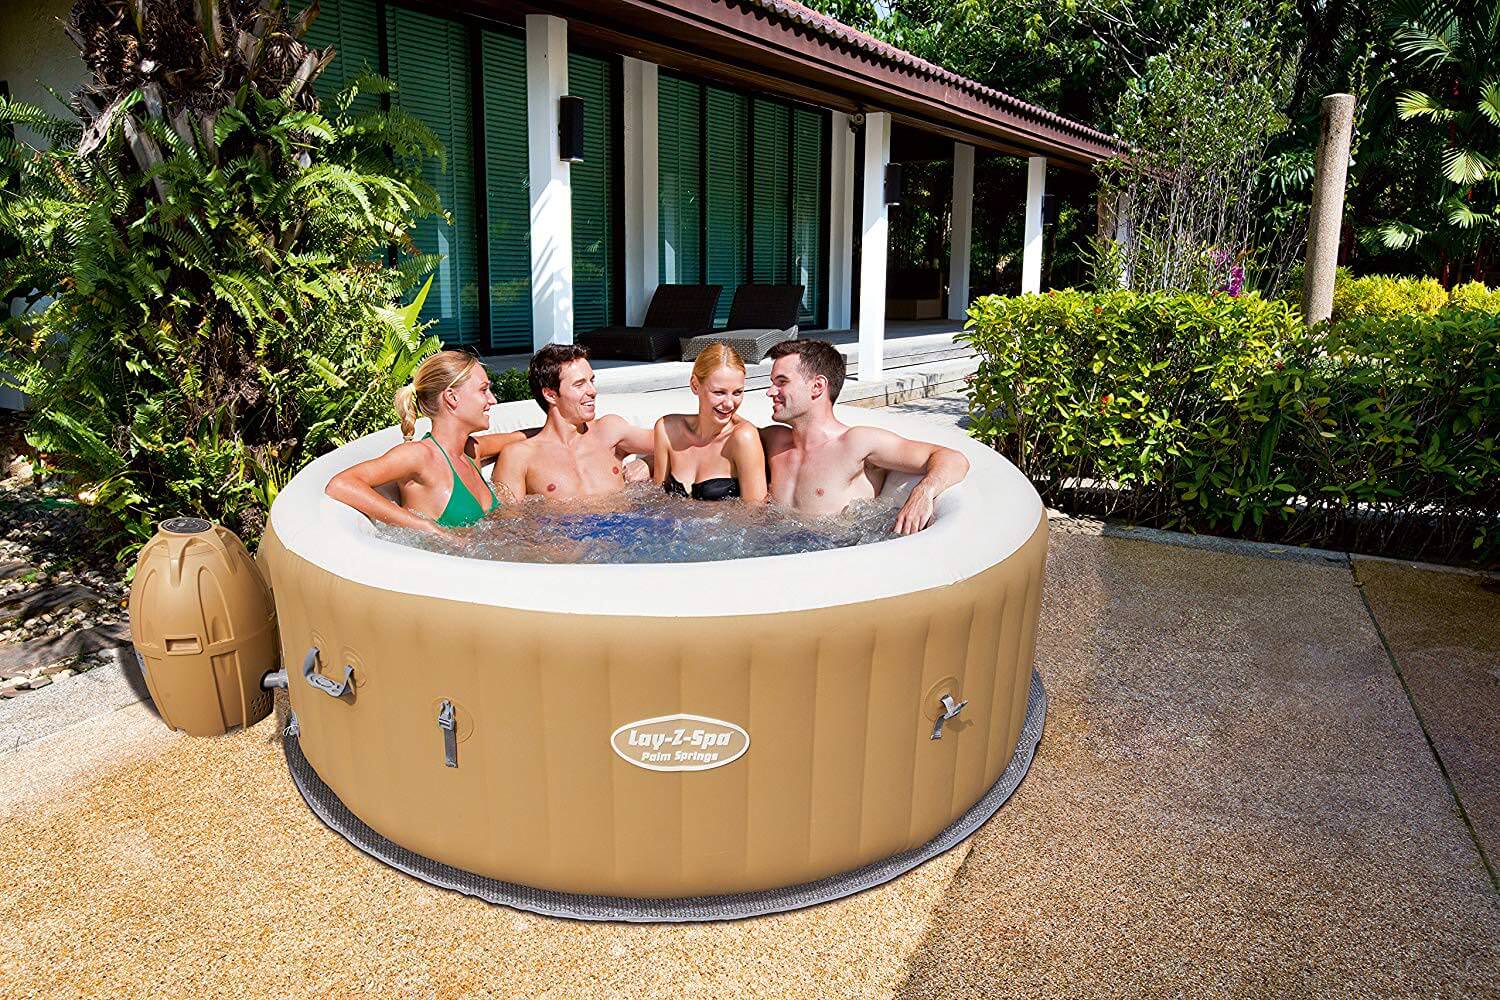 Lay-Z-Spa Tub - Person Buildings Hot Jet Air 4-6 Springs Palm Garden Inflatable Bestway Pure